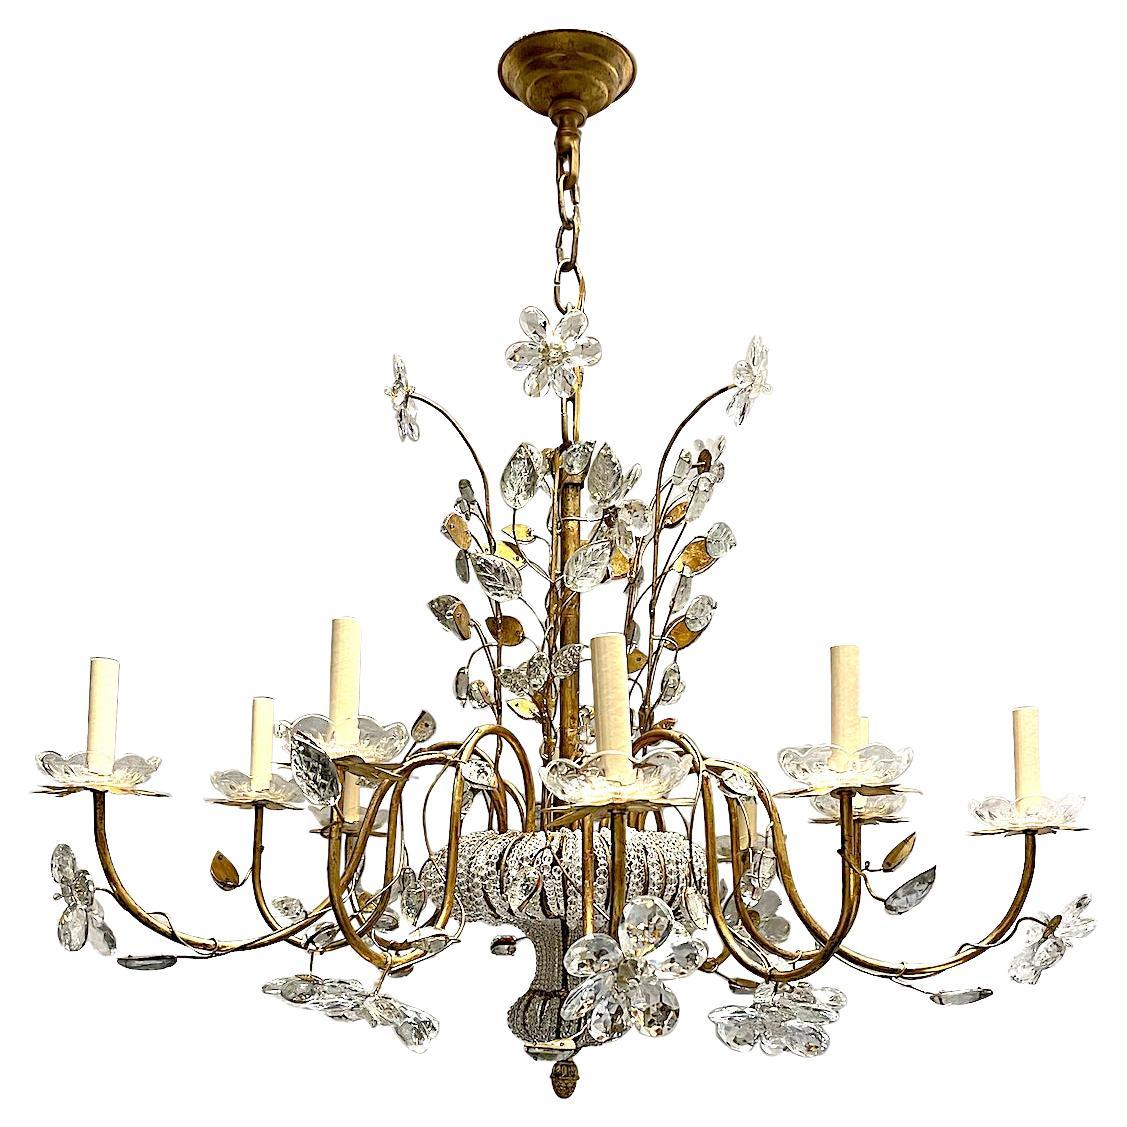 A circa 1950's French gilt chandelier with beaded body and crystal flowers. 10 lights.

Measurements:
Drop: 32